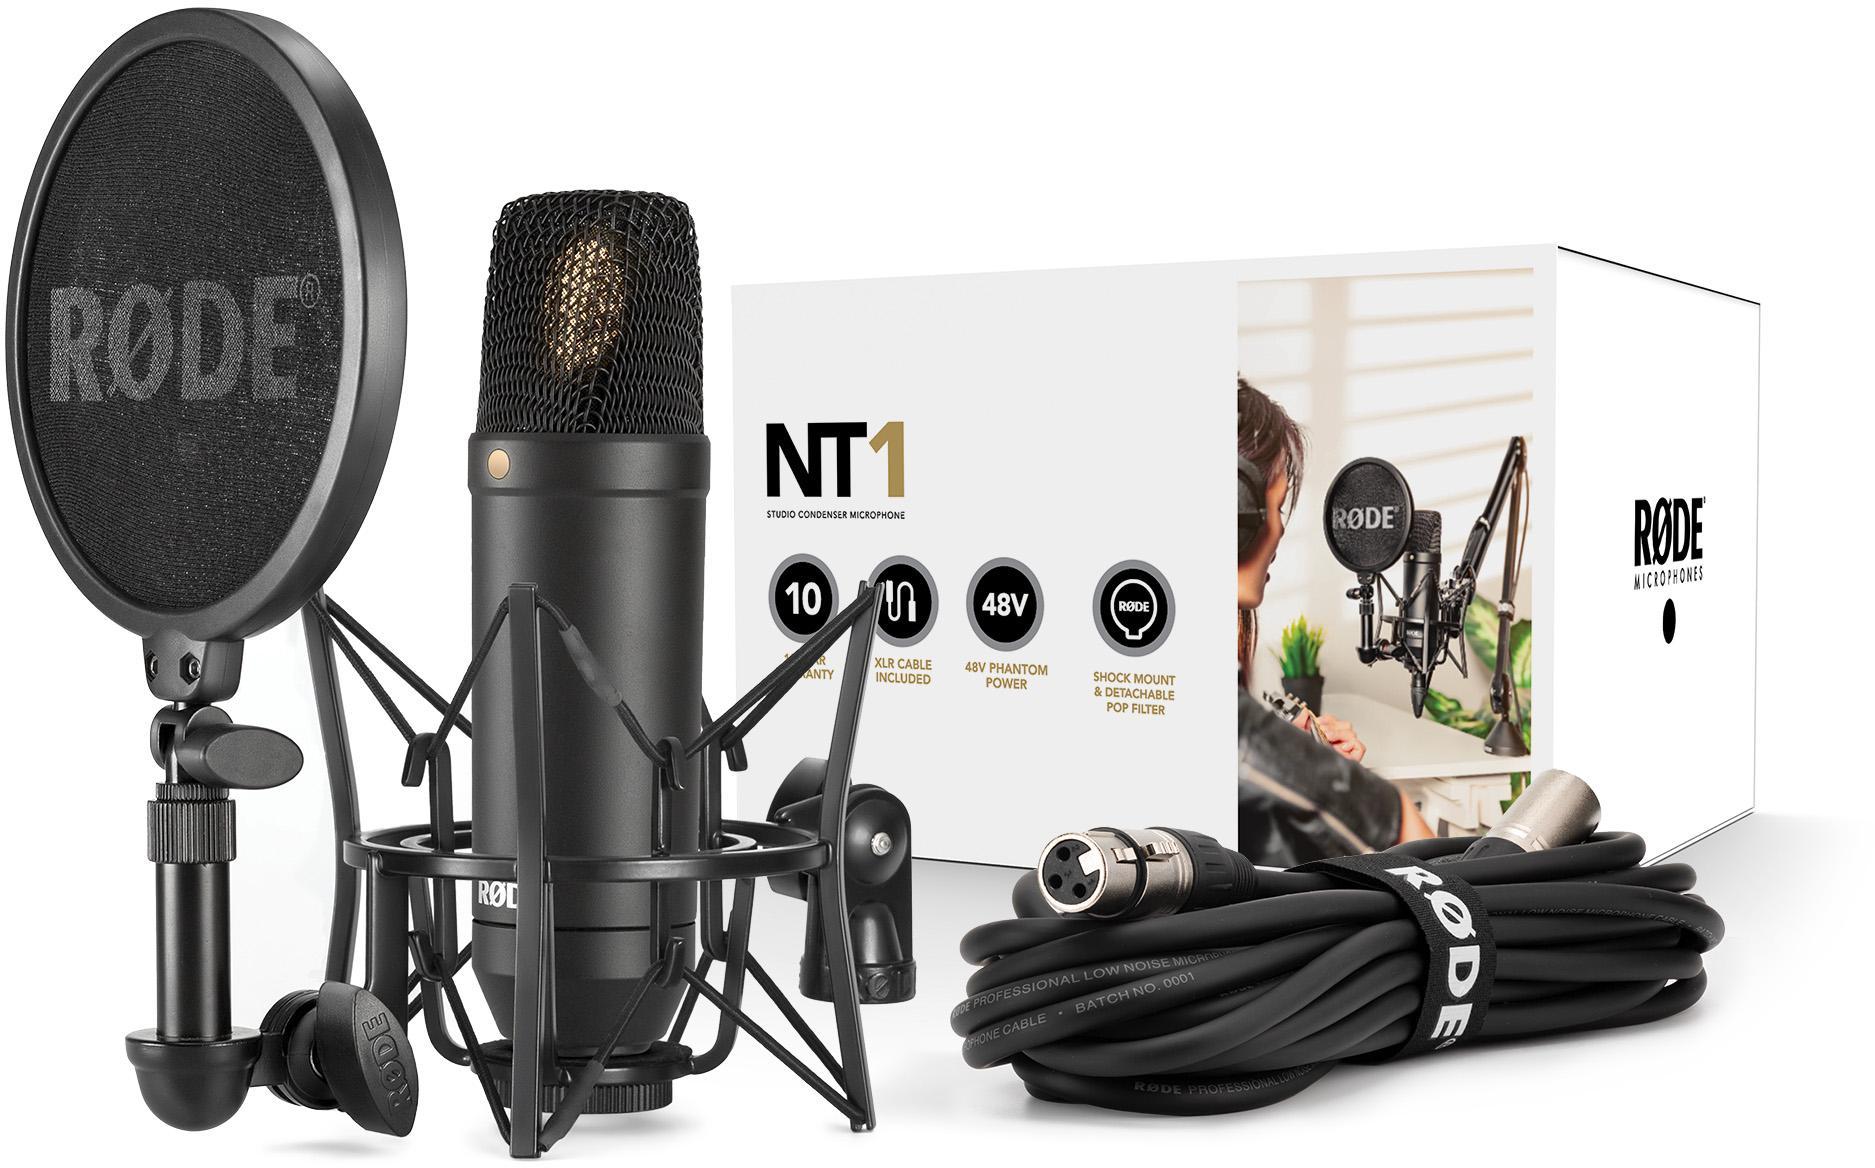 Microphone pack with stand Rode NT1 Kit